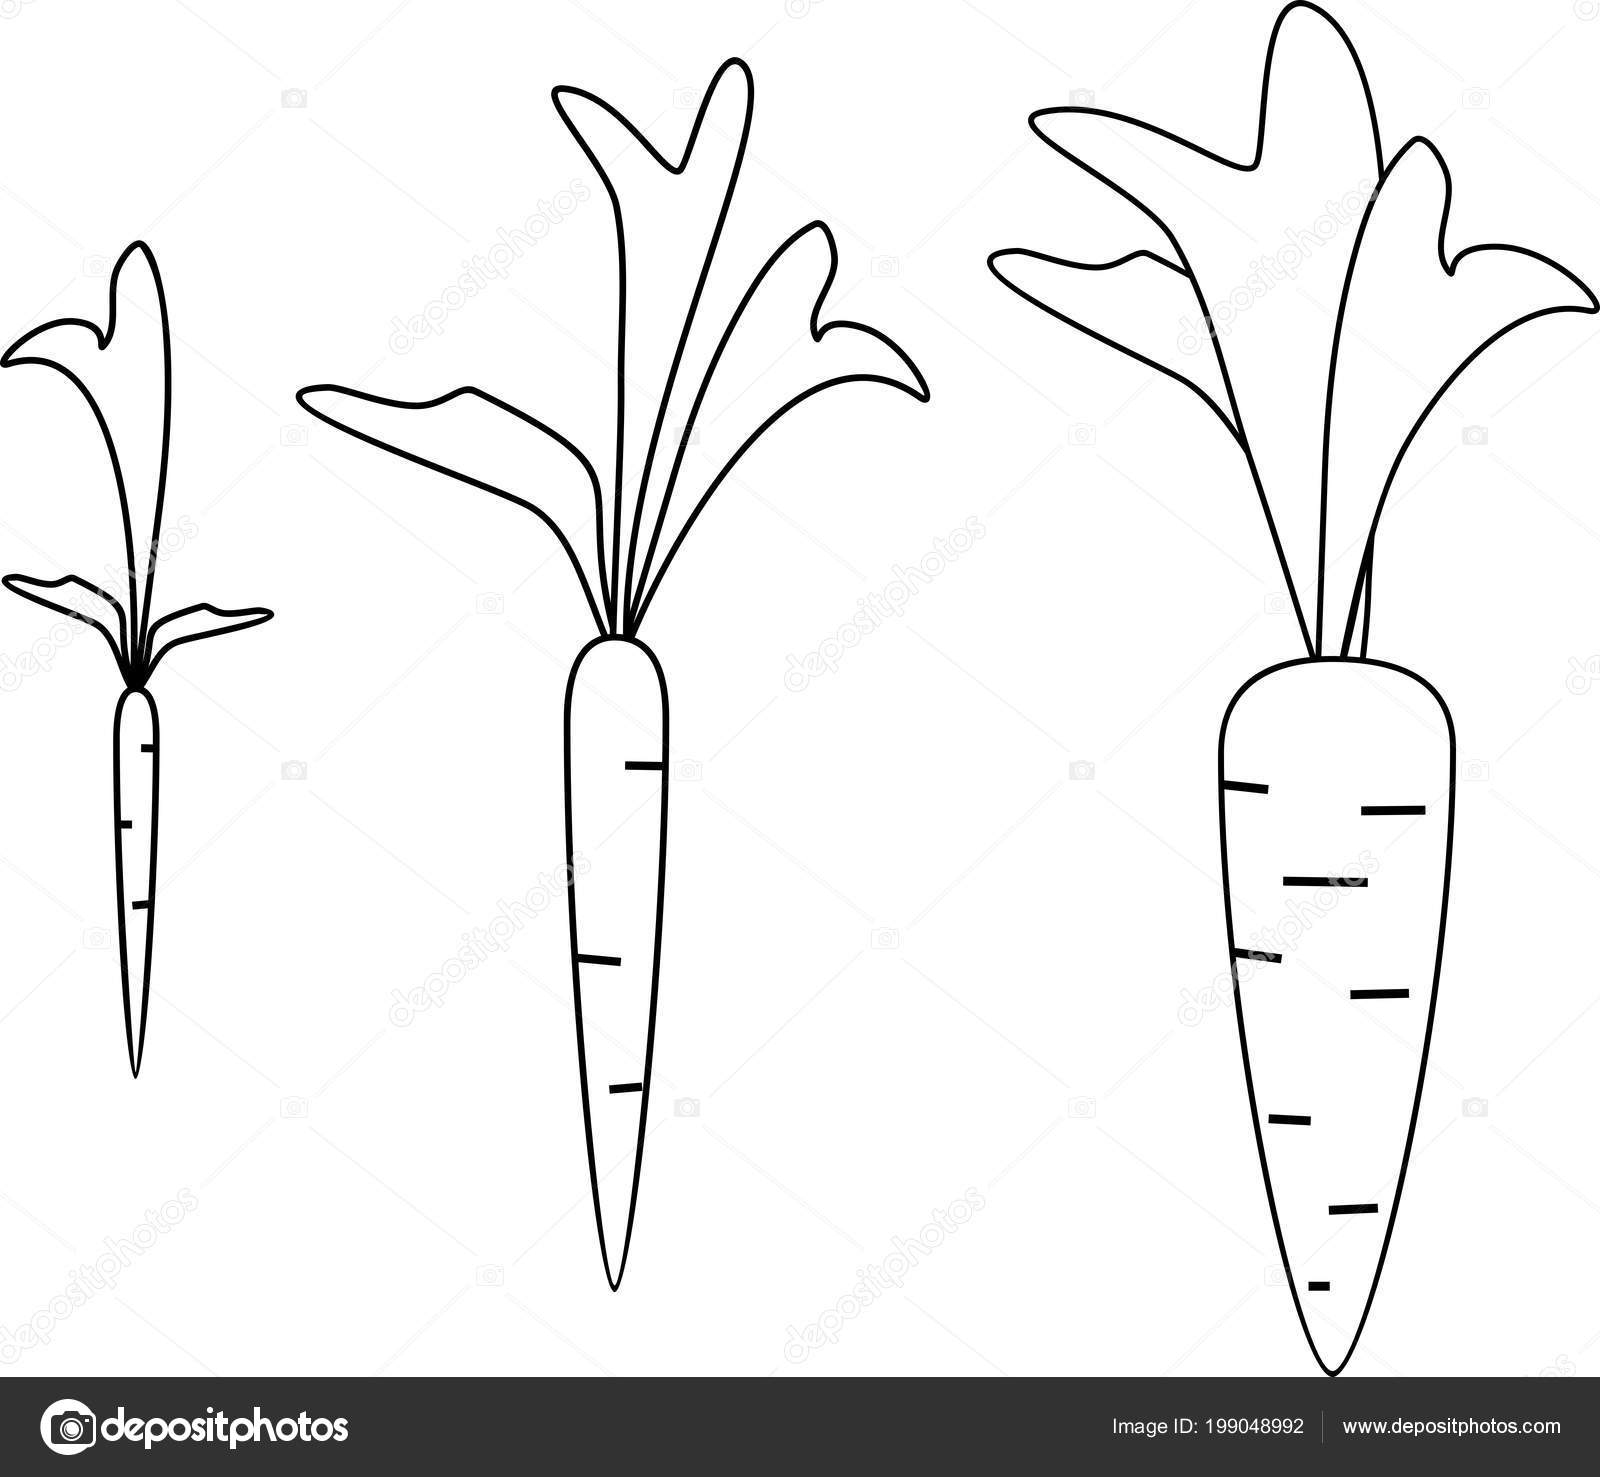 Carrot Growth Stages Coloring Pages Stock Vector C Mariaflaya